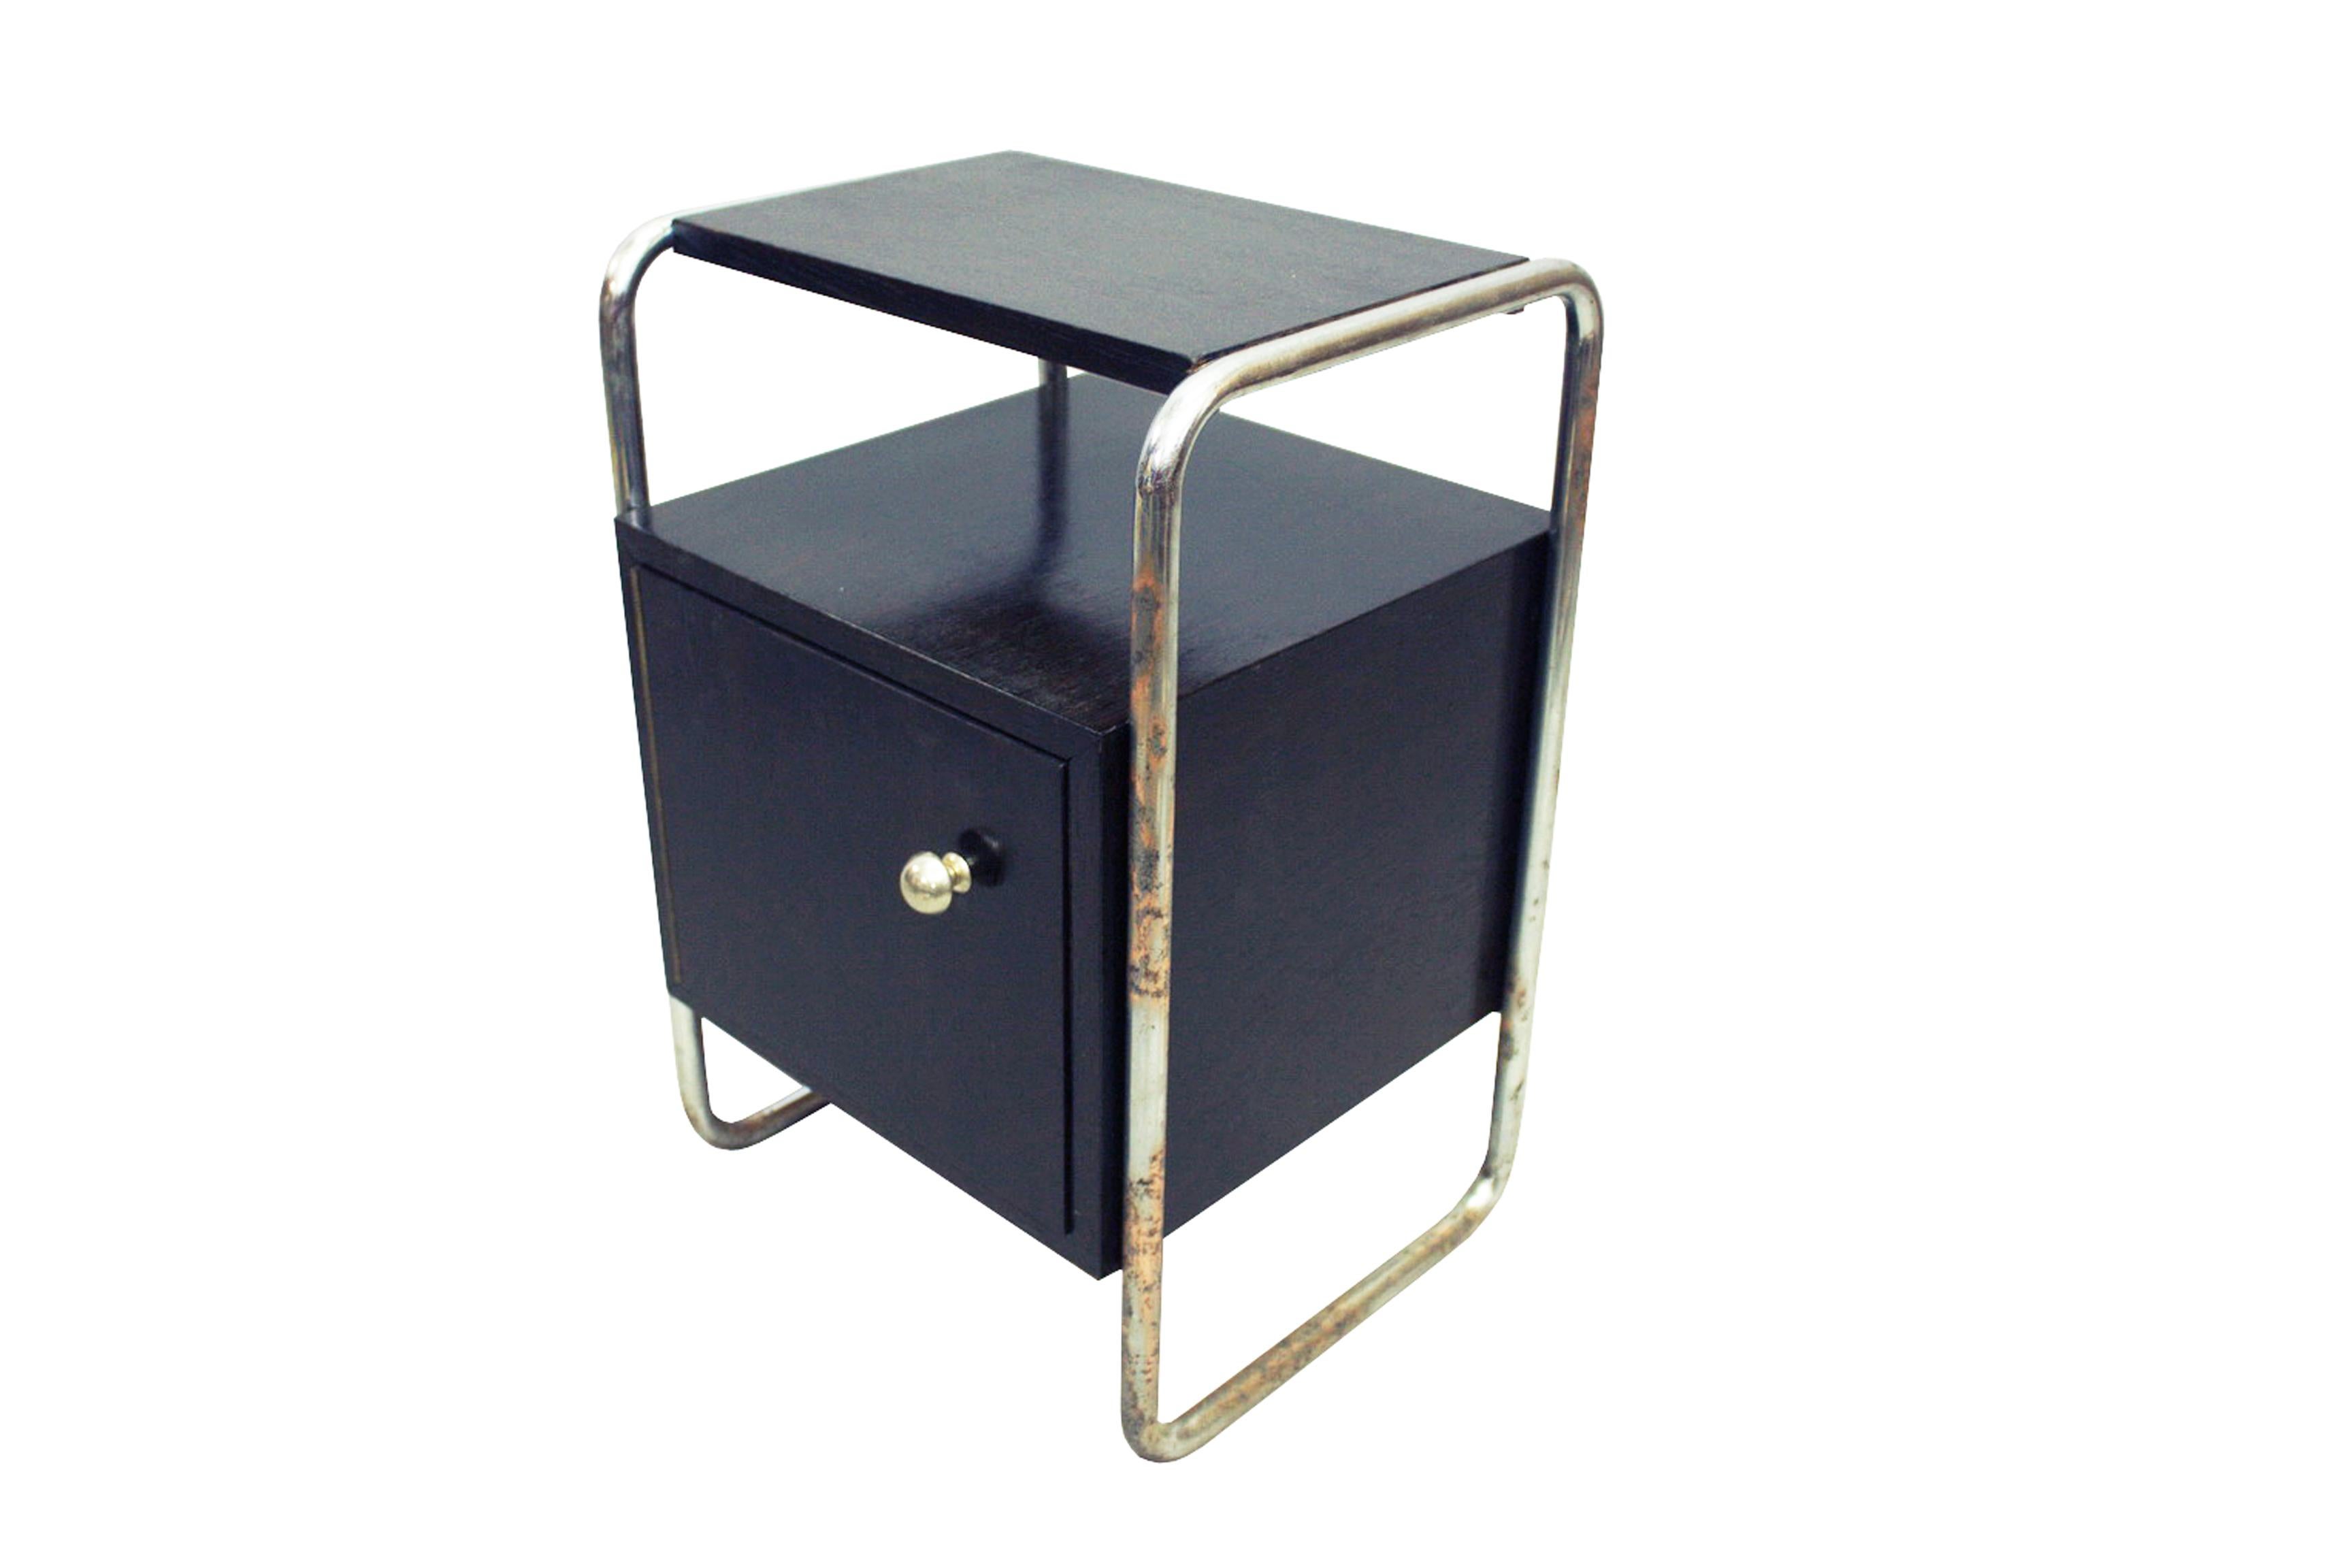 A black painted veneered cube cabinet fixed to chromed steel tubular frame loop on either side, this eye-catching bedside table is a lovely example of functionalism – a simple form yet memorable design typical of this era. There were many variations